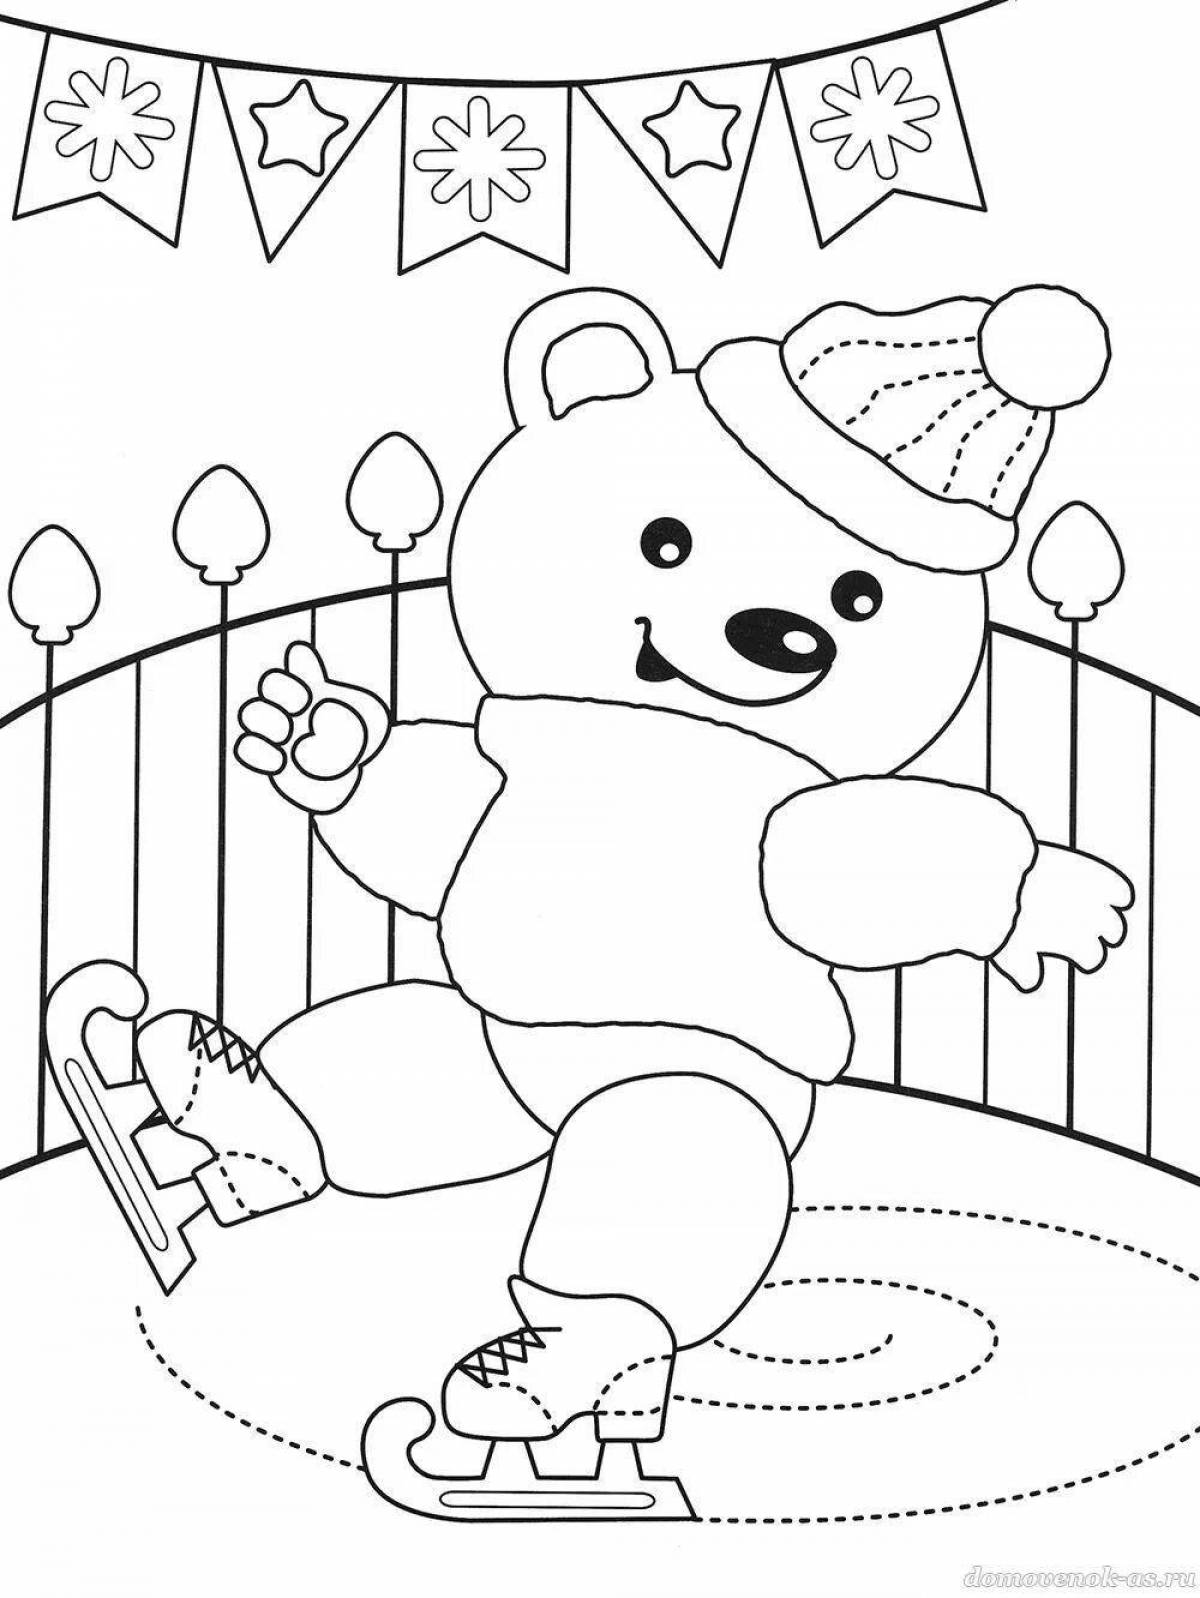 Serene 5 year old winter coloring book